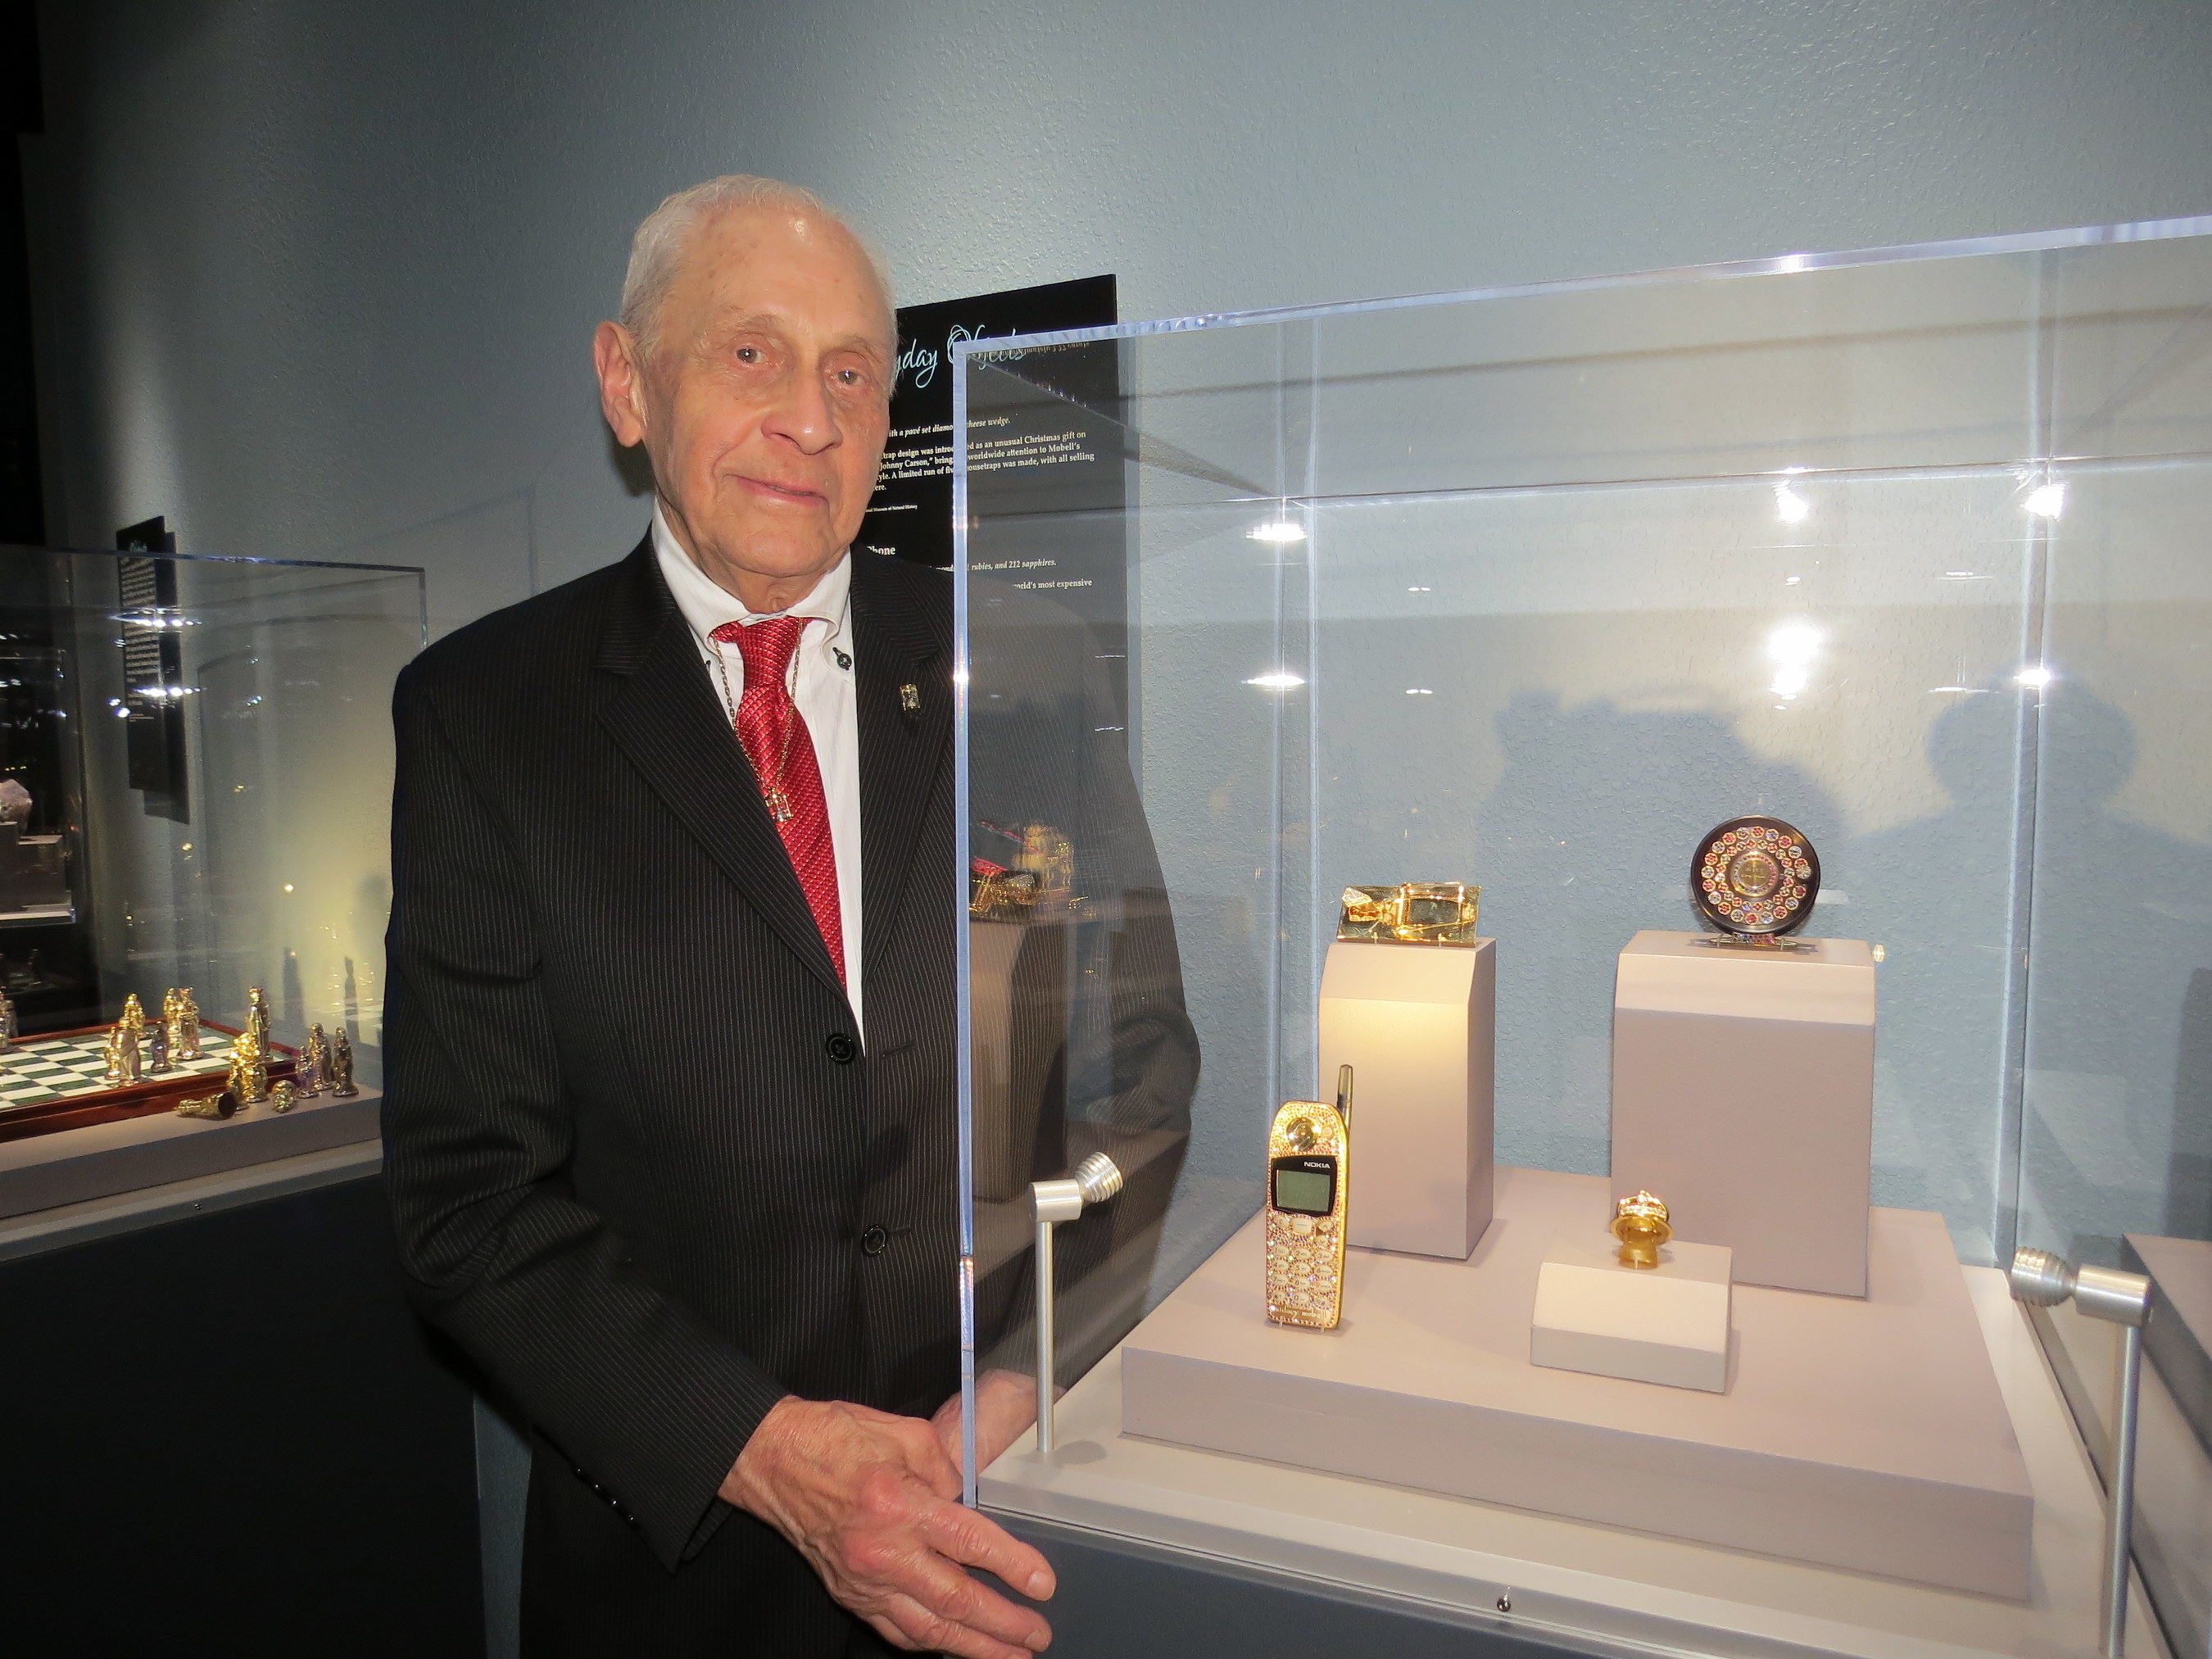 Famous jewelry designer Sidney Mobell helps open special exhibit Jeweled Objects of Desire at Tellus Science Museum.